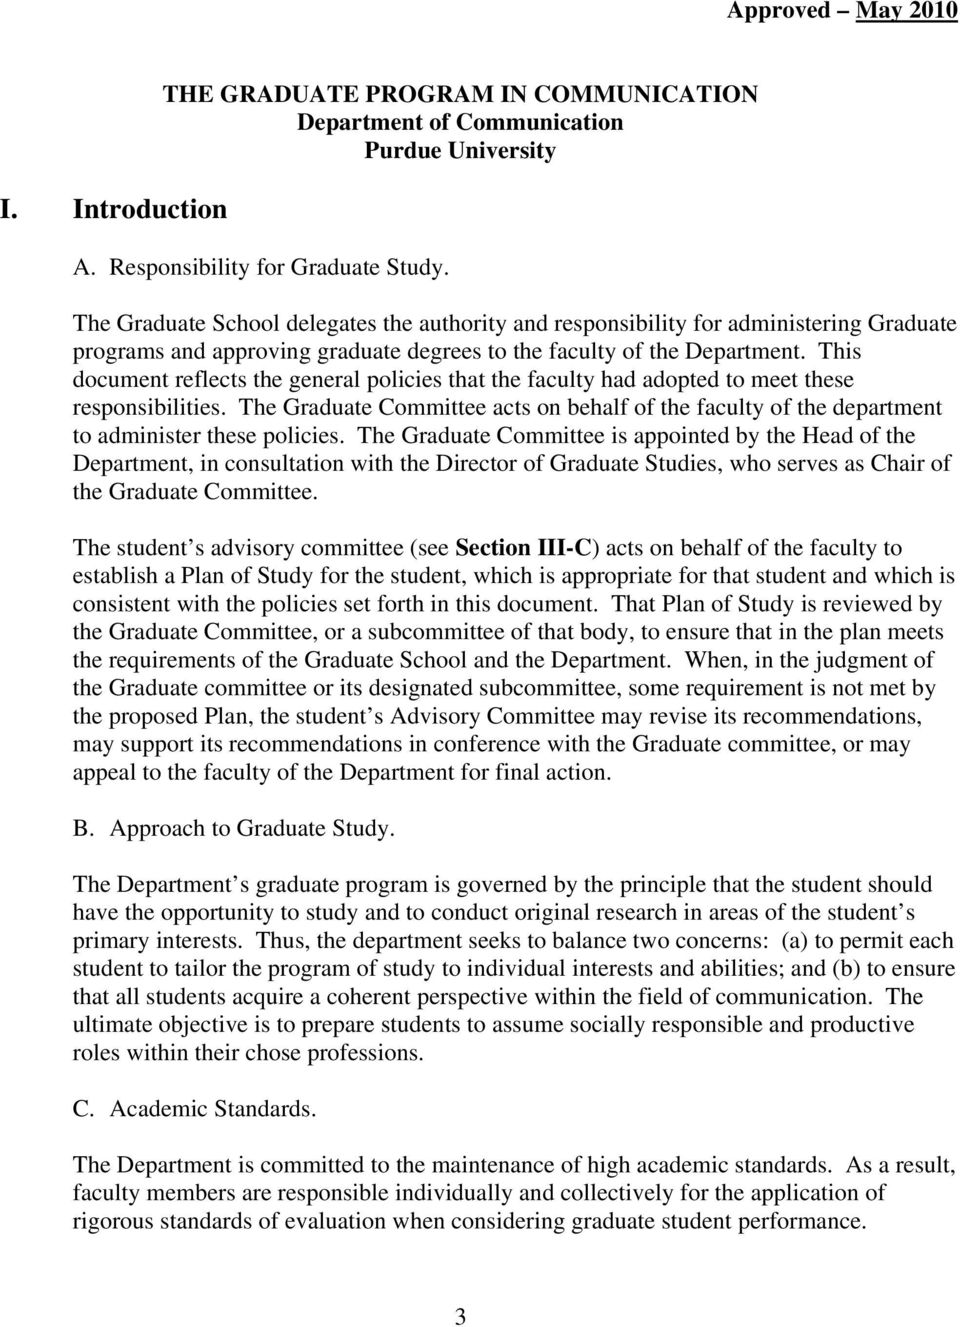 This document reflects the general policies that the faculty had adopted to meet these responsibilities.